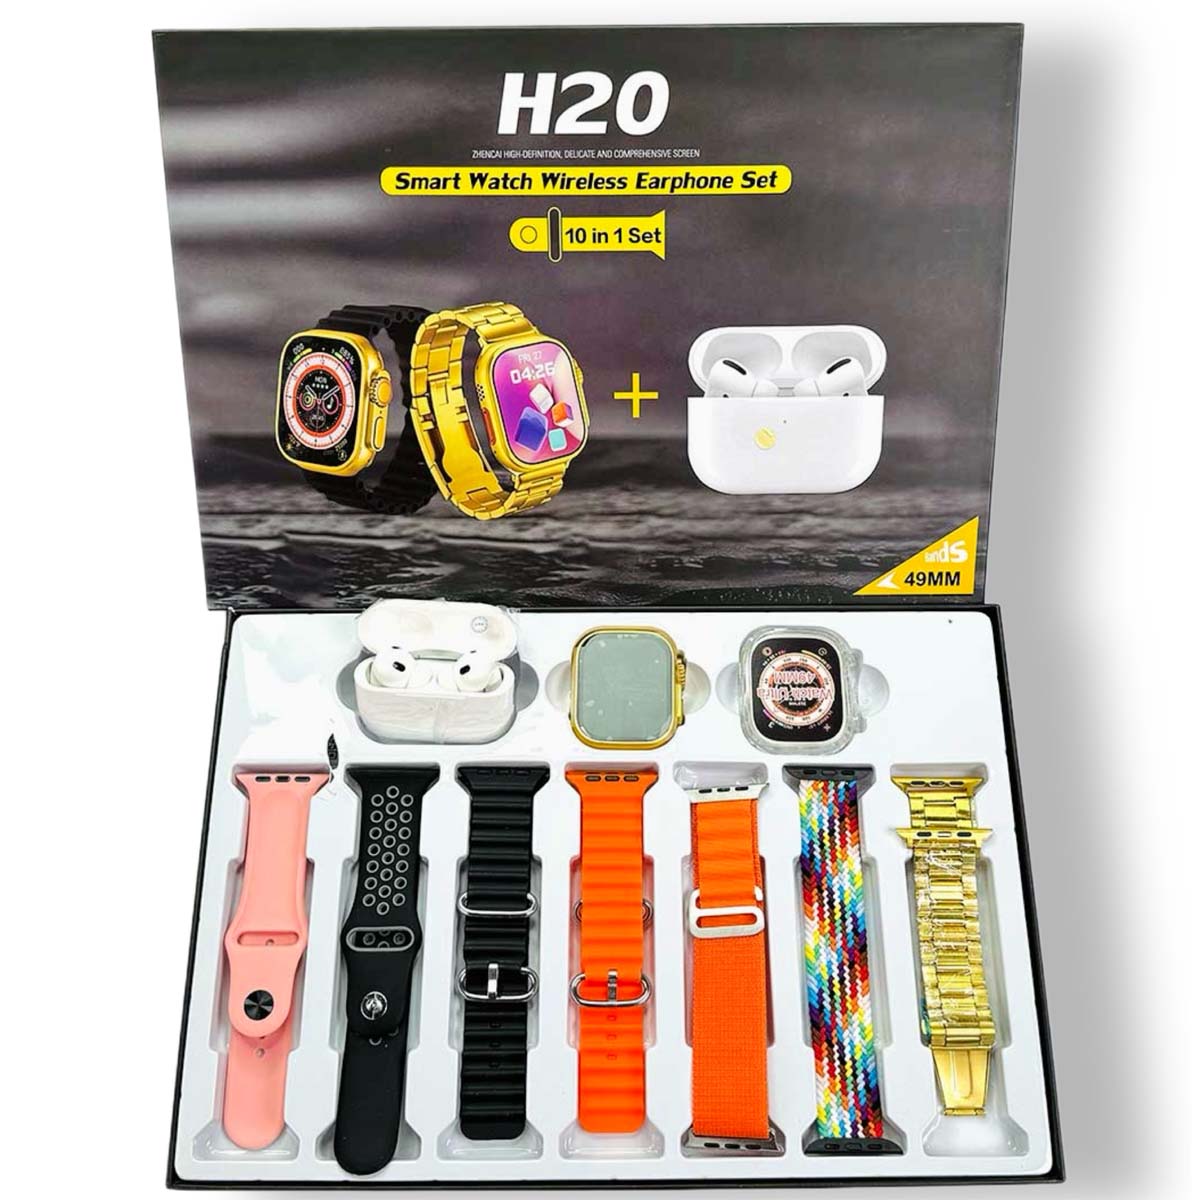 H20 ULTRA SMART WATCH AIRPODS 10in1 SET